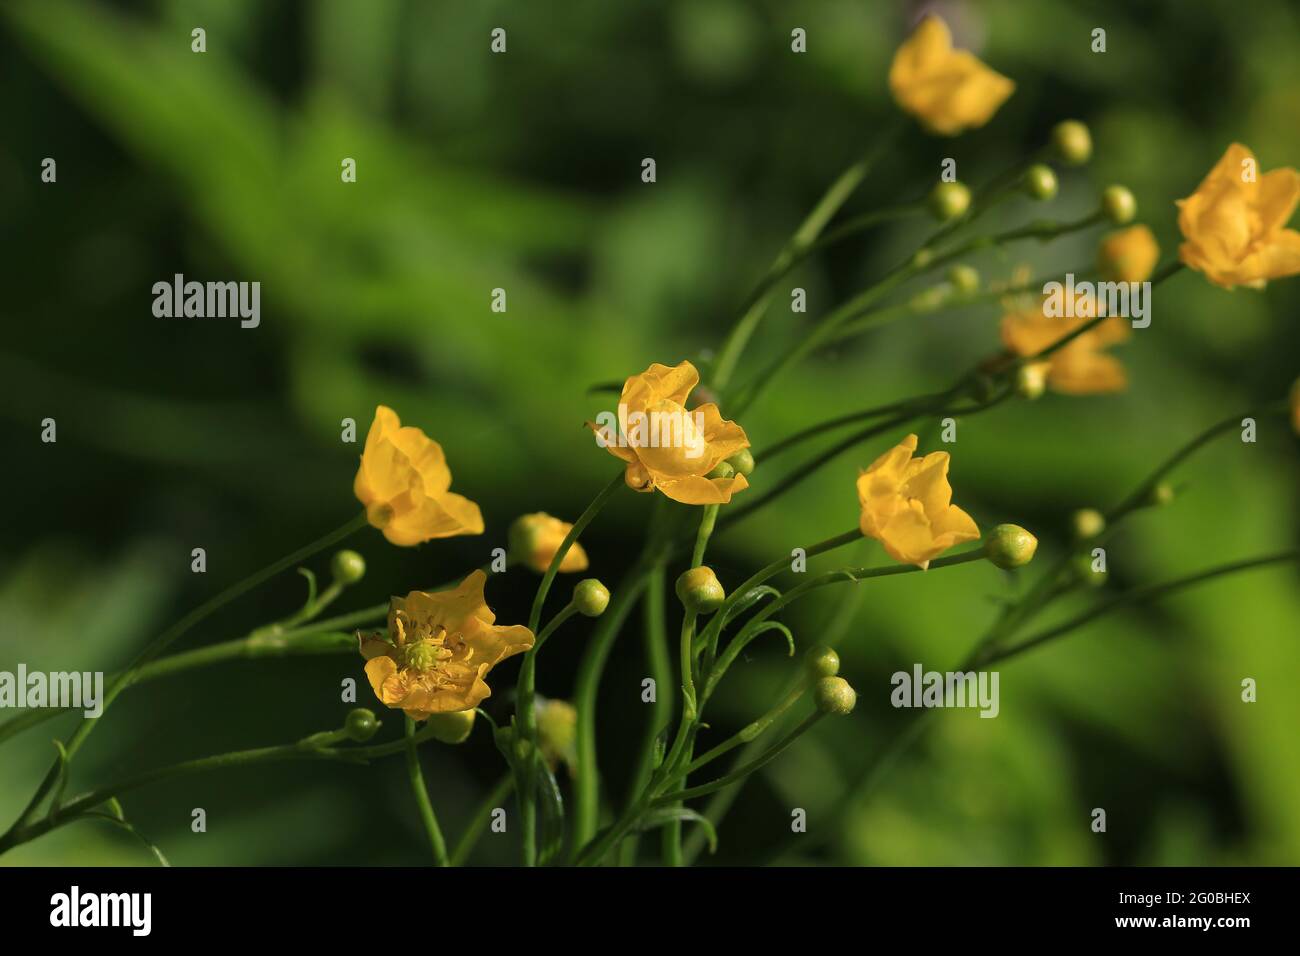 Goldilocks Buttercup, Ranunculus auricomus. Yellow flowers on a green background in bright sunlight. Sunny yellow buttercups close up. Horizontal. Stock Photo